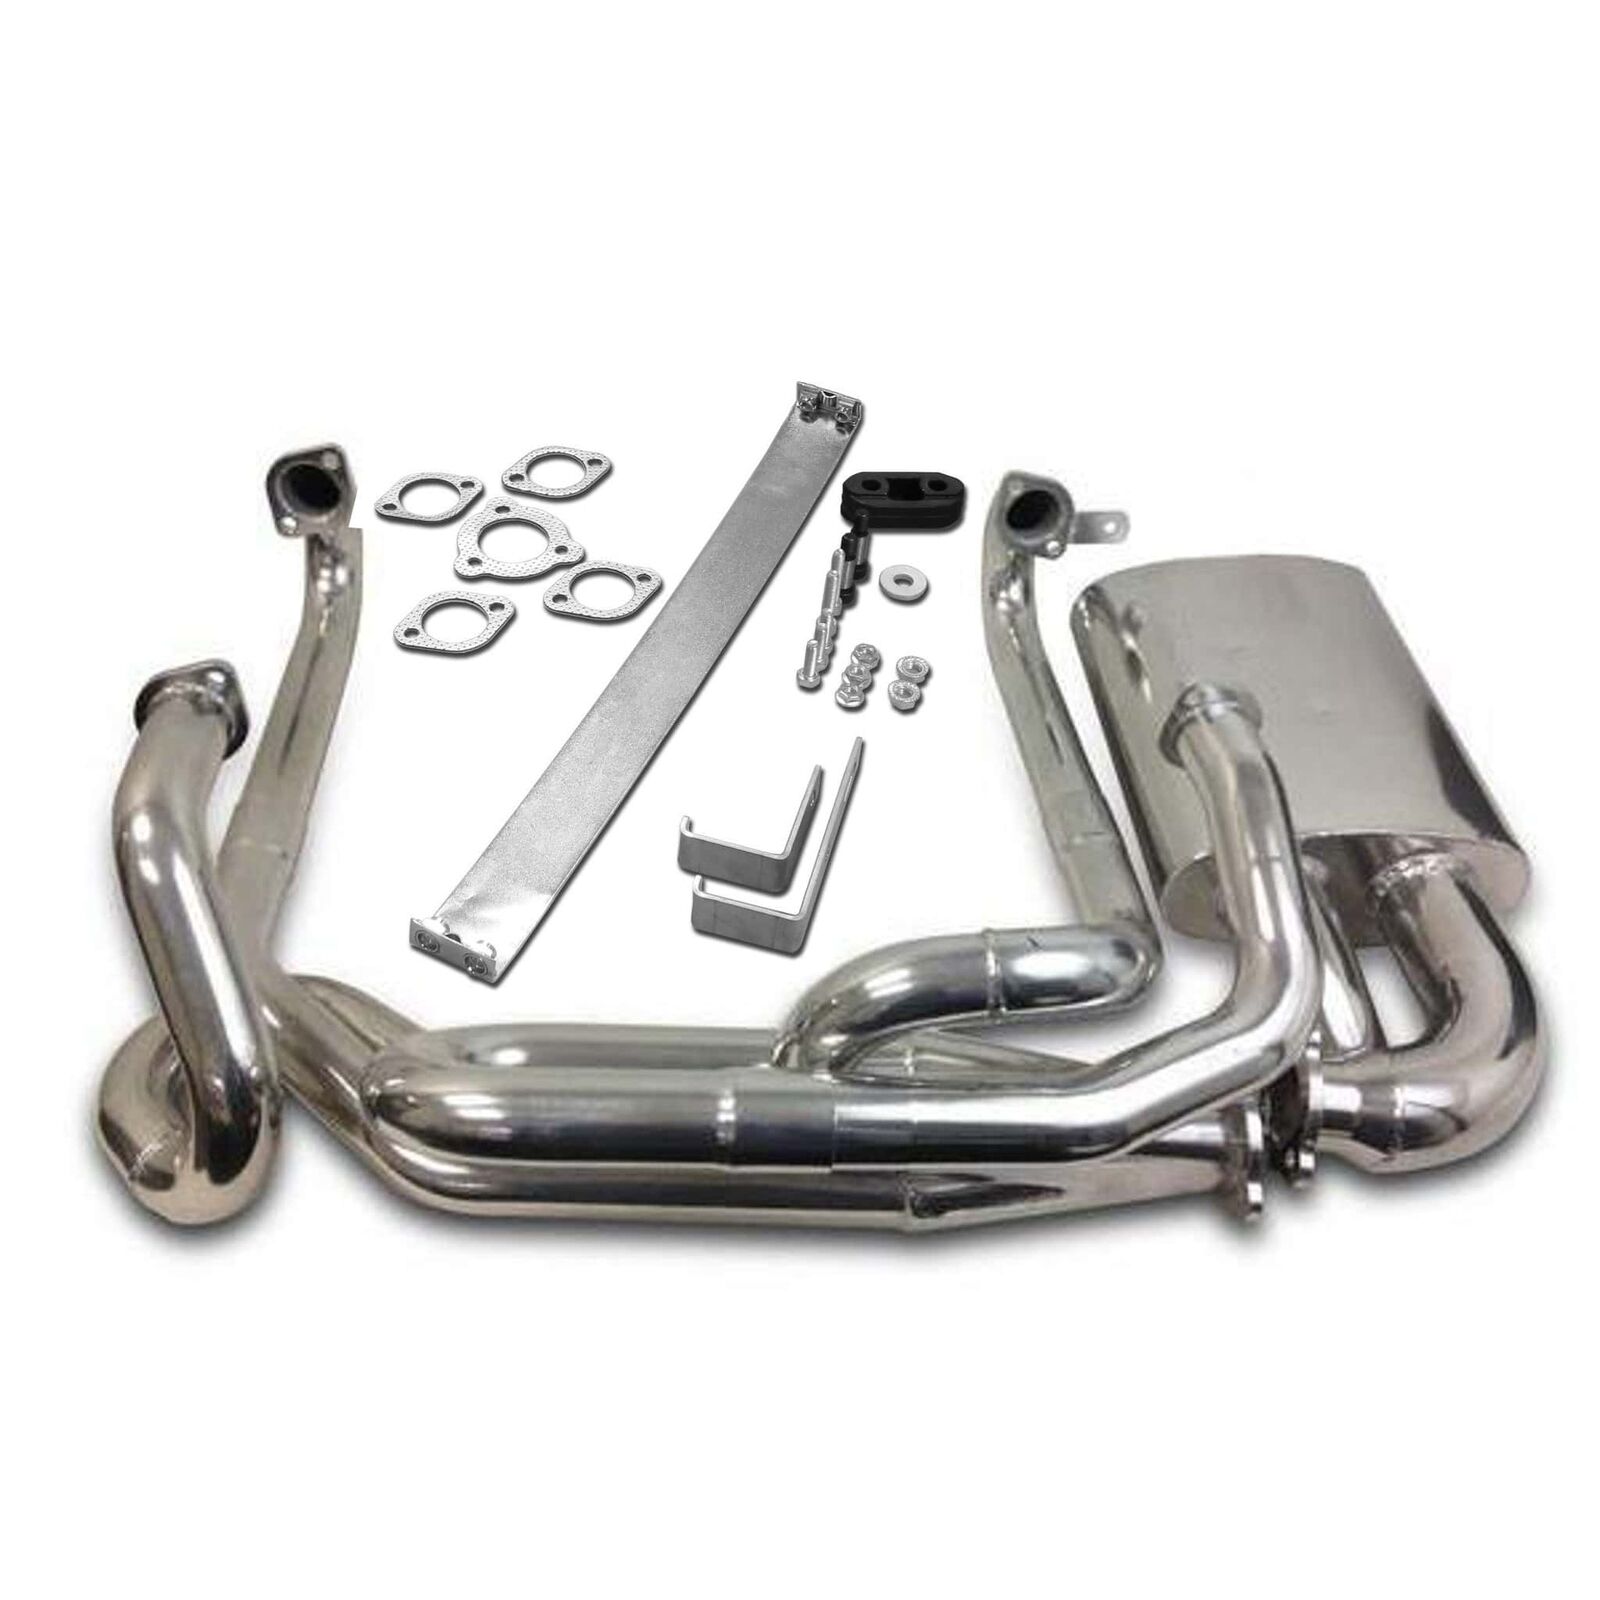 VW Complete Sidewinder Style Exhaust 1-5/8